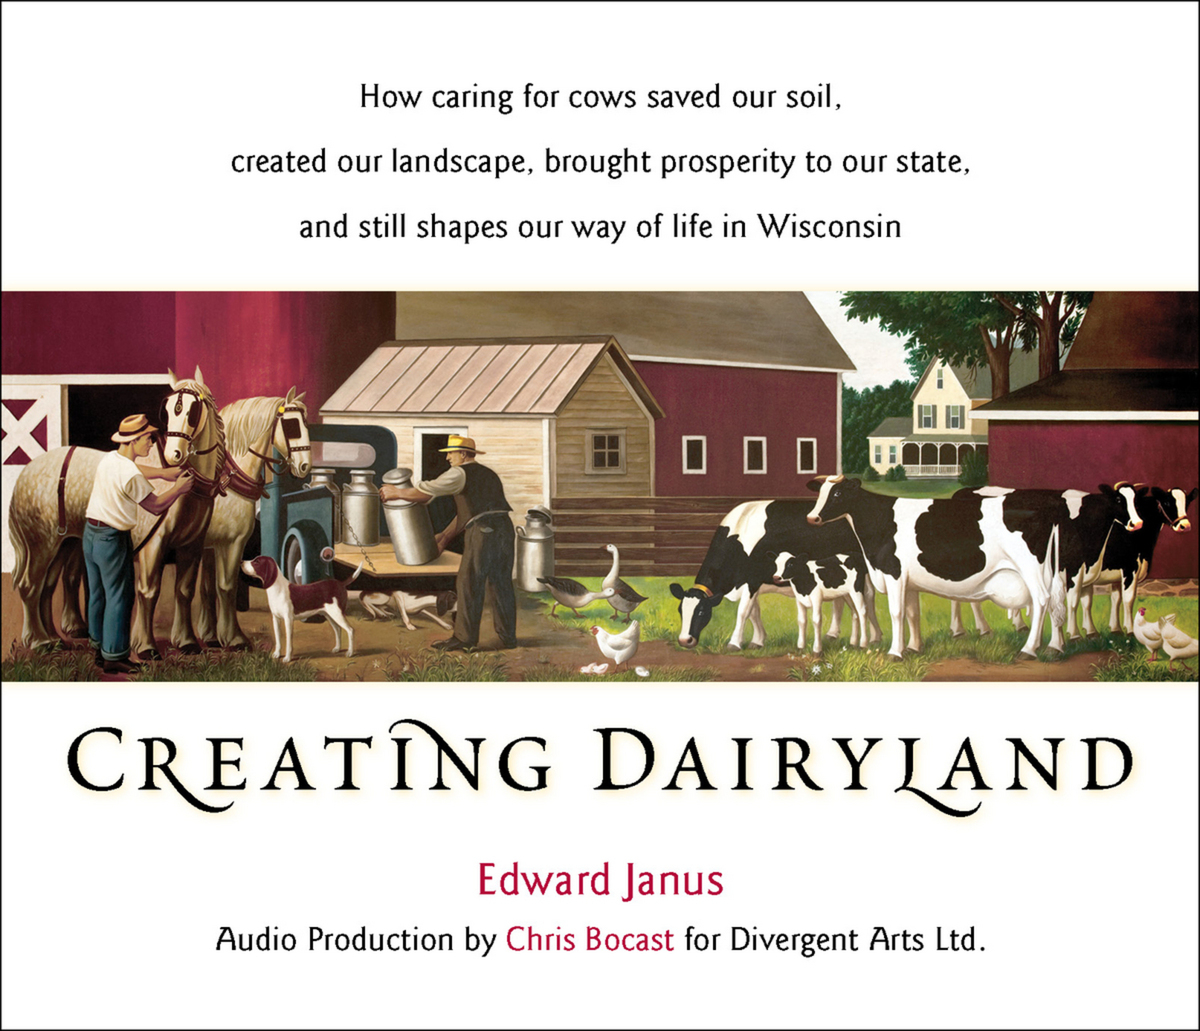 Creating Dairyland: How caring for cows saved our soil, created our landscape, brought prosperity to our state, and still shapes our way of life in Wisconsin Edward Janus